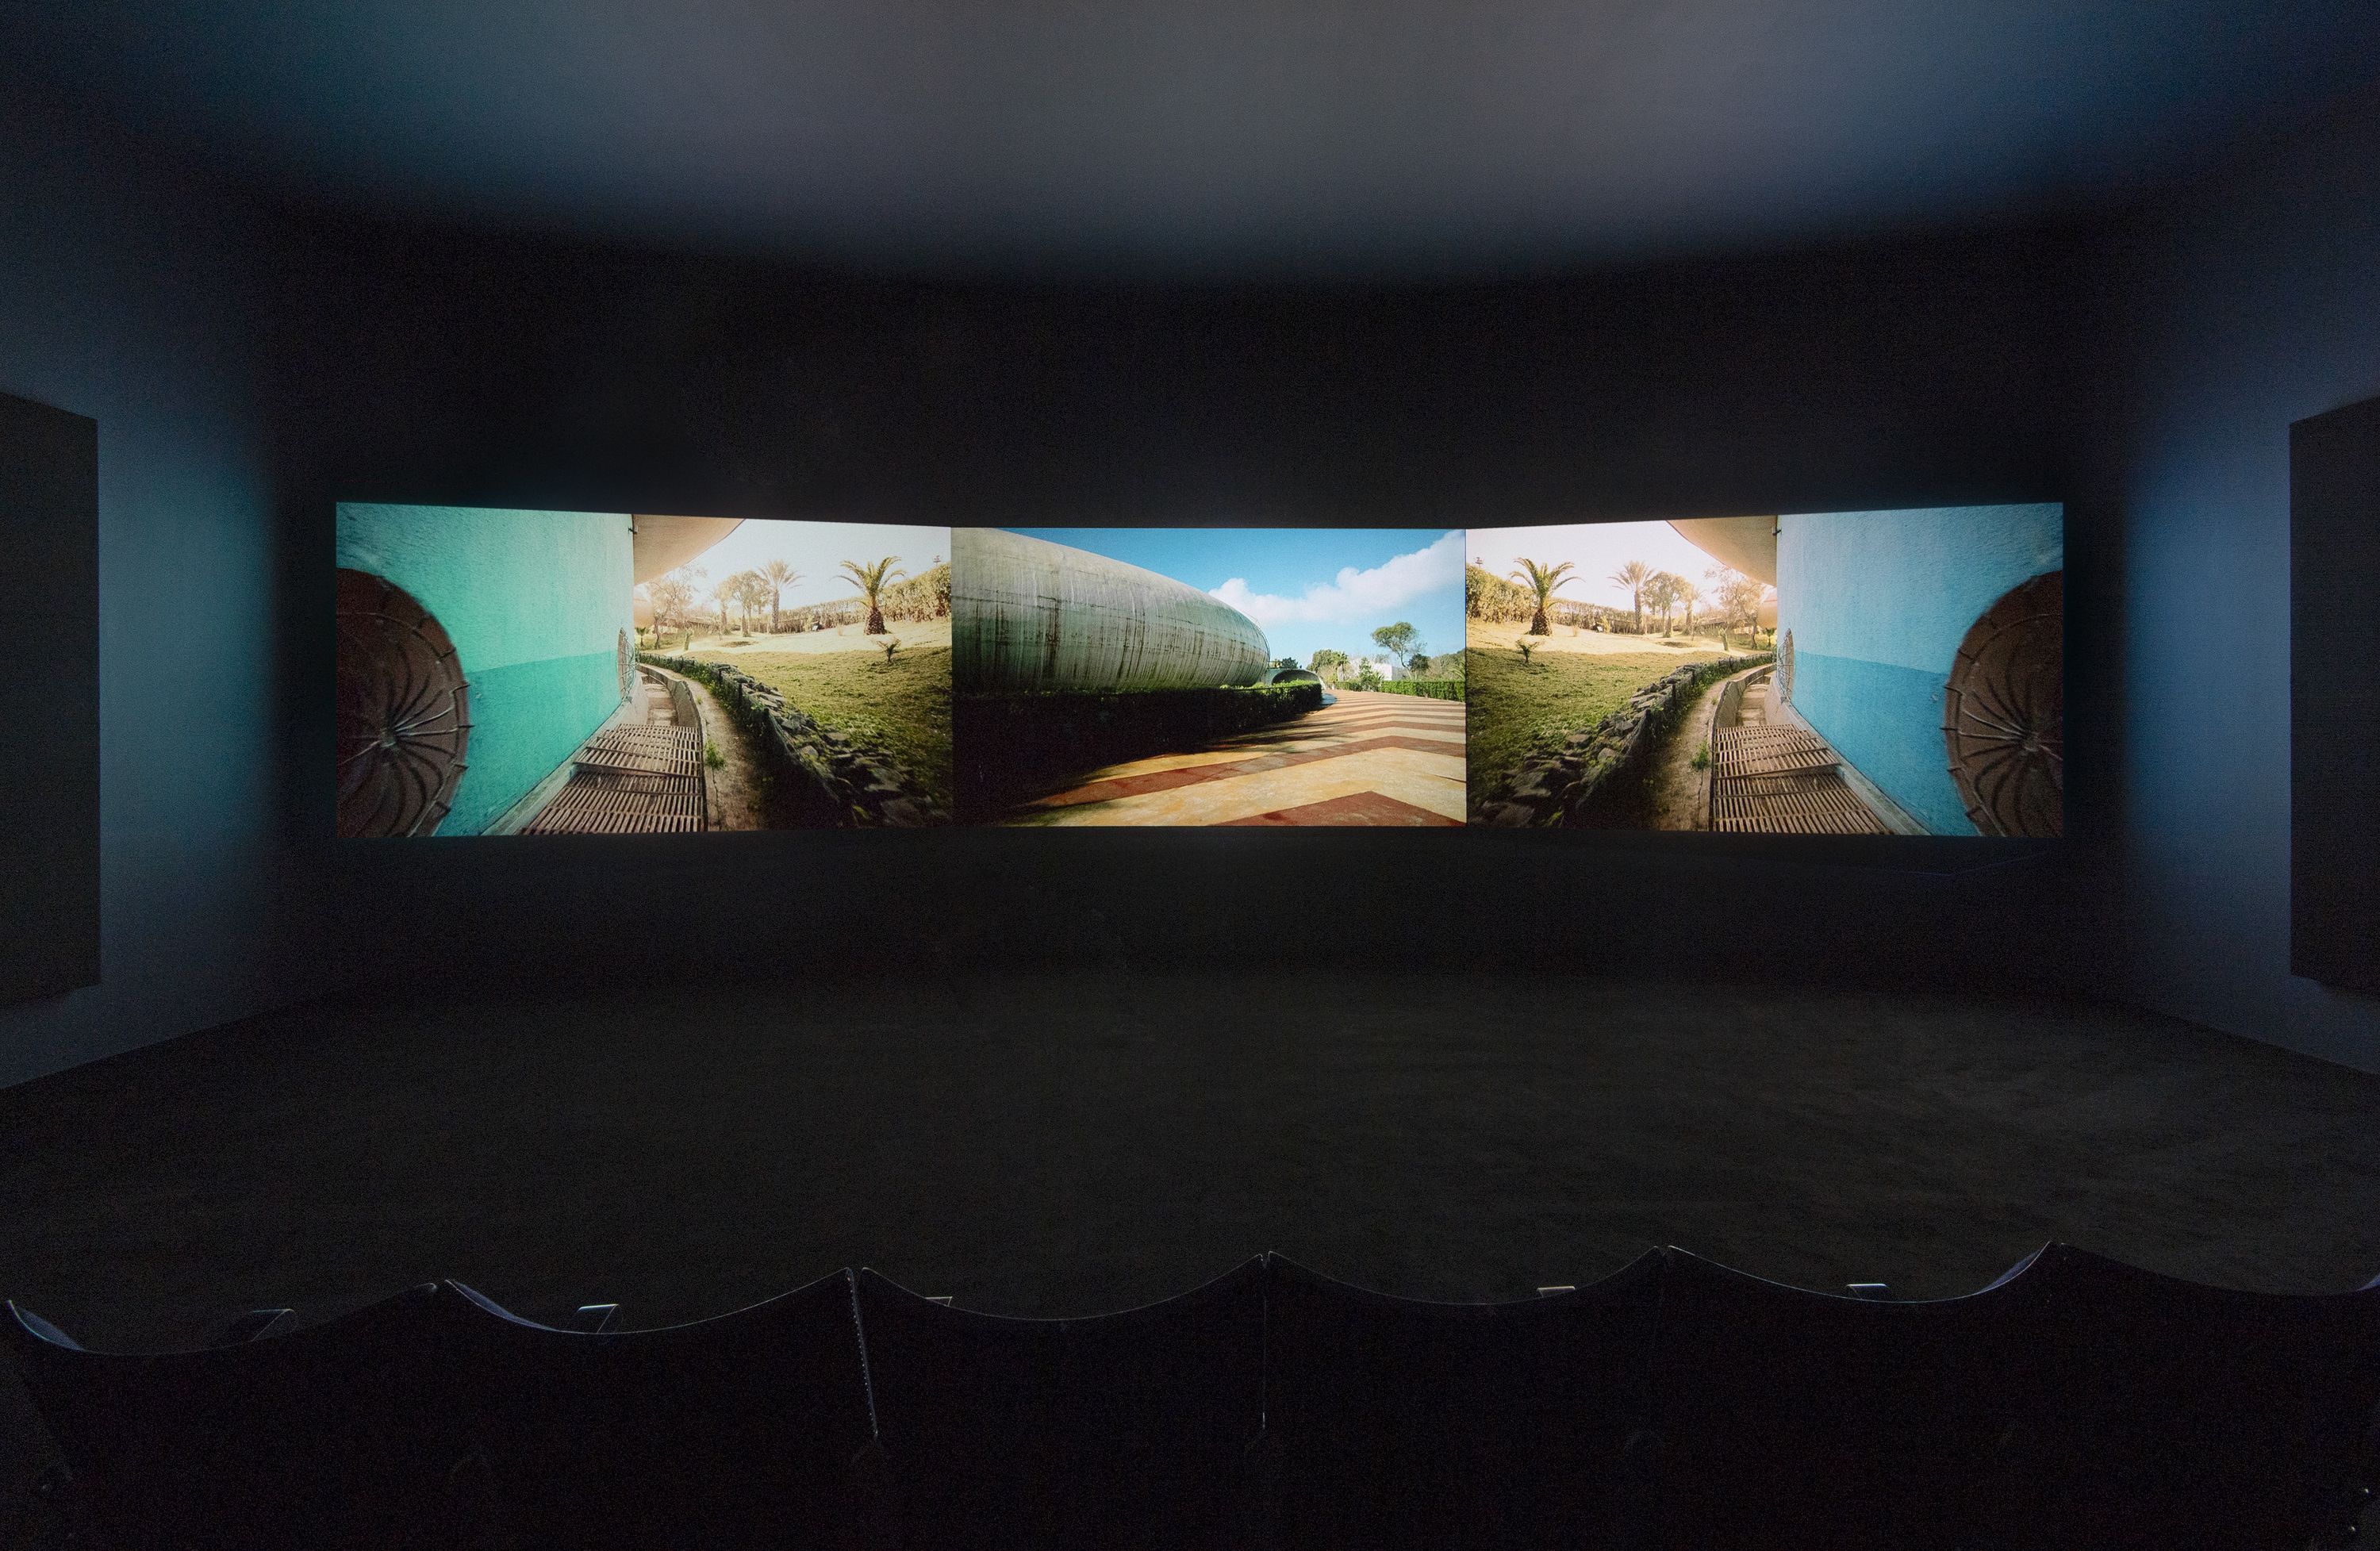 Naeem Mohaiemen, Two Meetings and a Funeral 2017, three-channel video, Turner Prize 2018 exhibition installation view, Tate Britain (26 September 2018 - 9 January 2019). Tate Photography, Matt Greenwood